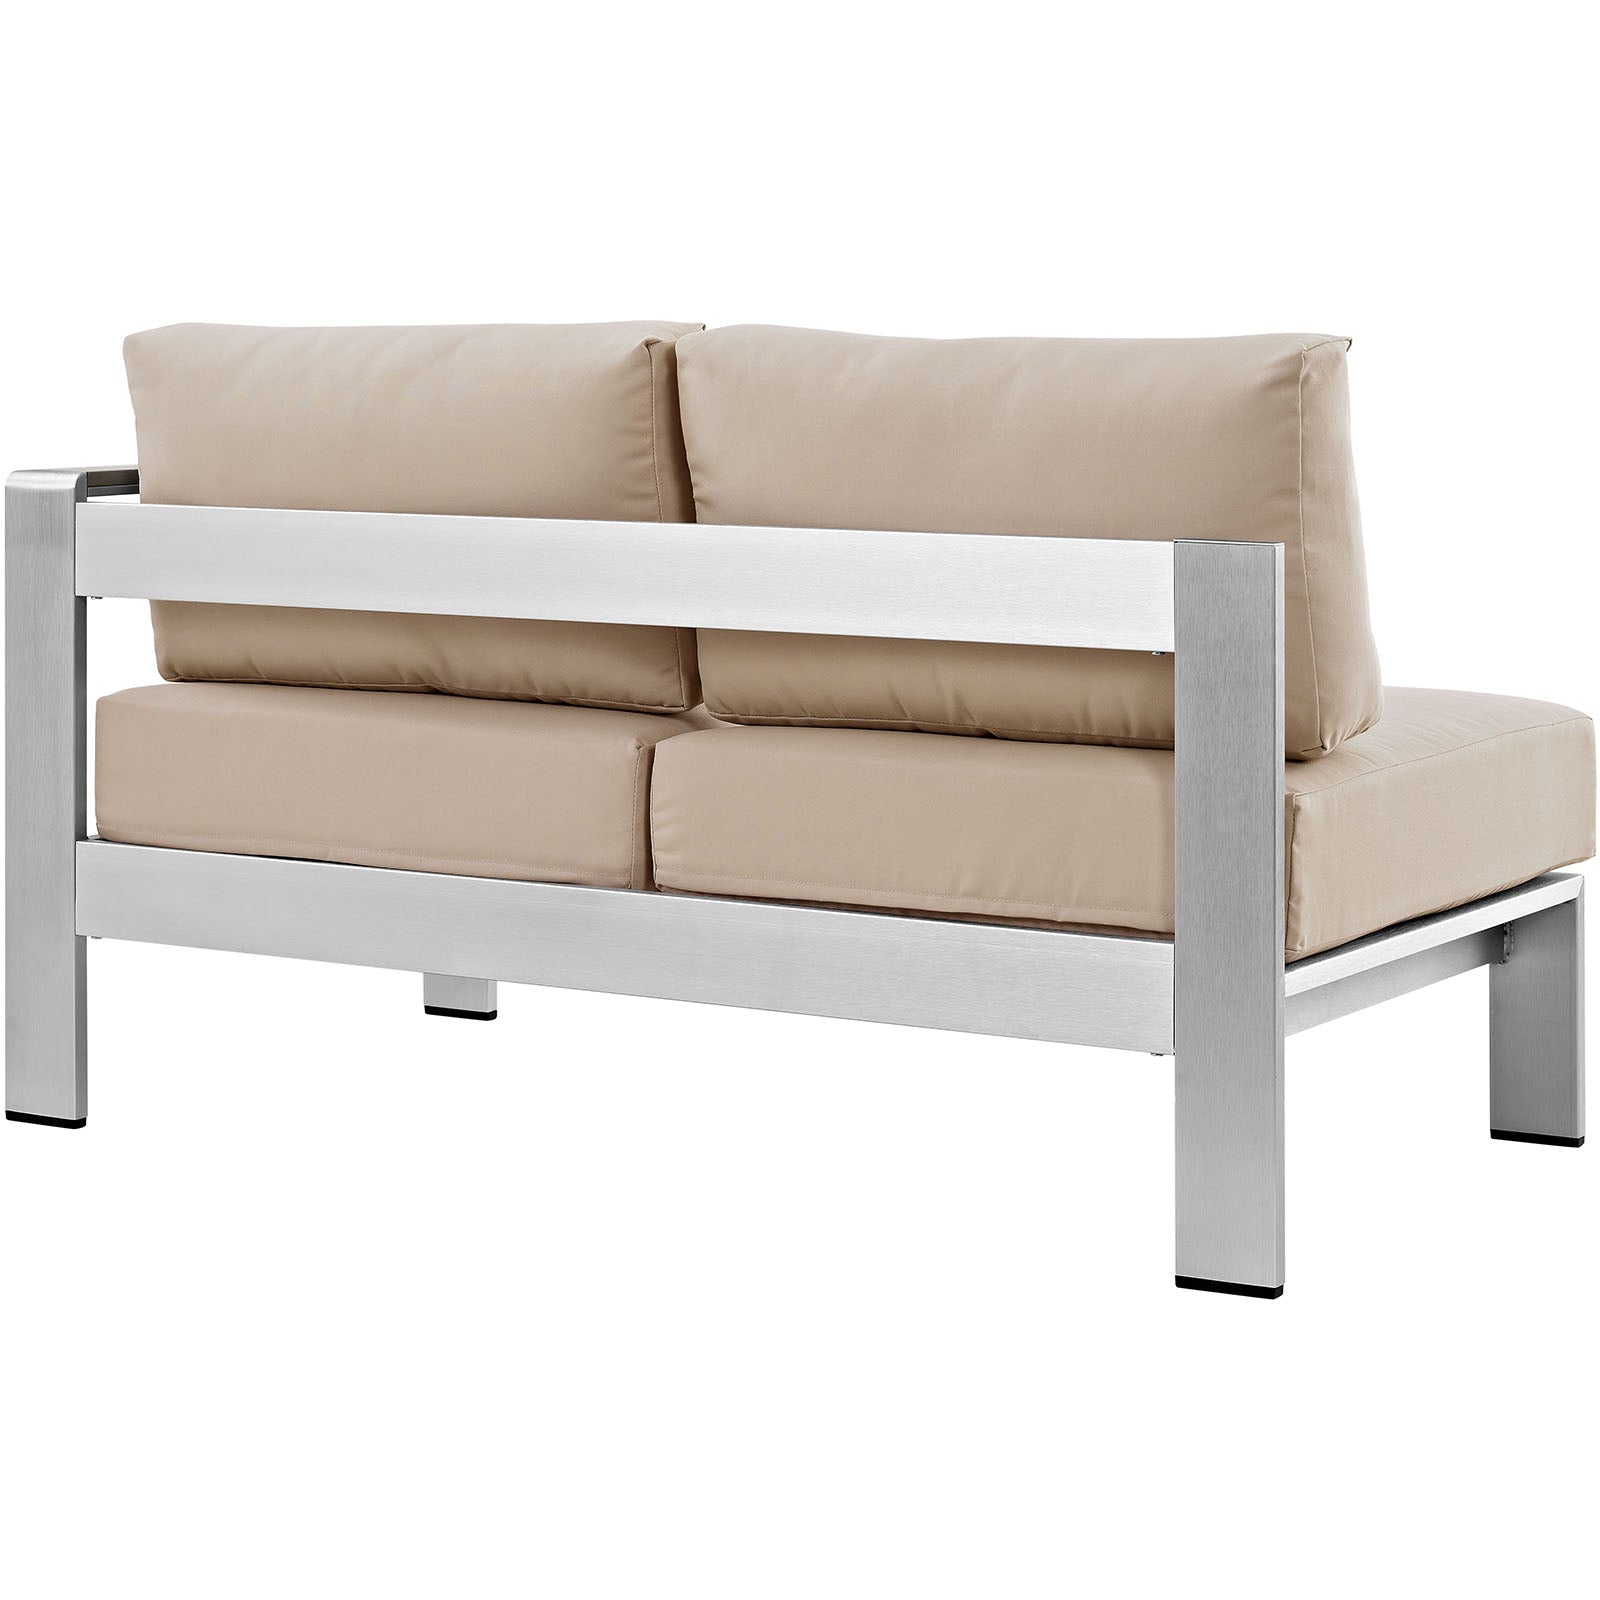 Shore Right-Arm Corner Sectional Outdoor Patio Aluminum Loveseat - East Shore Modern Home Furnishings